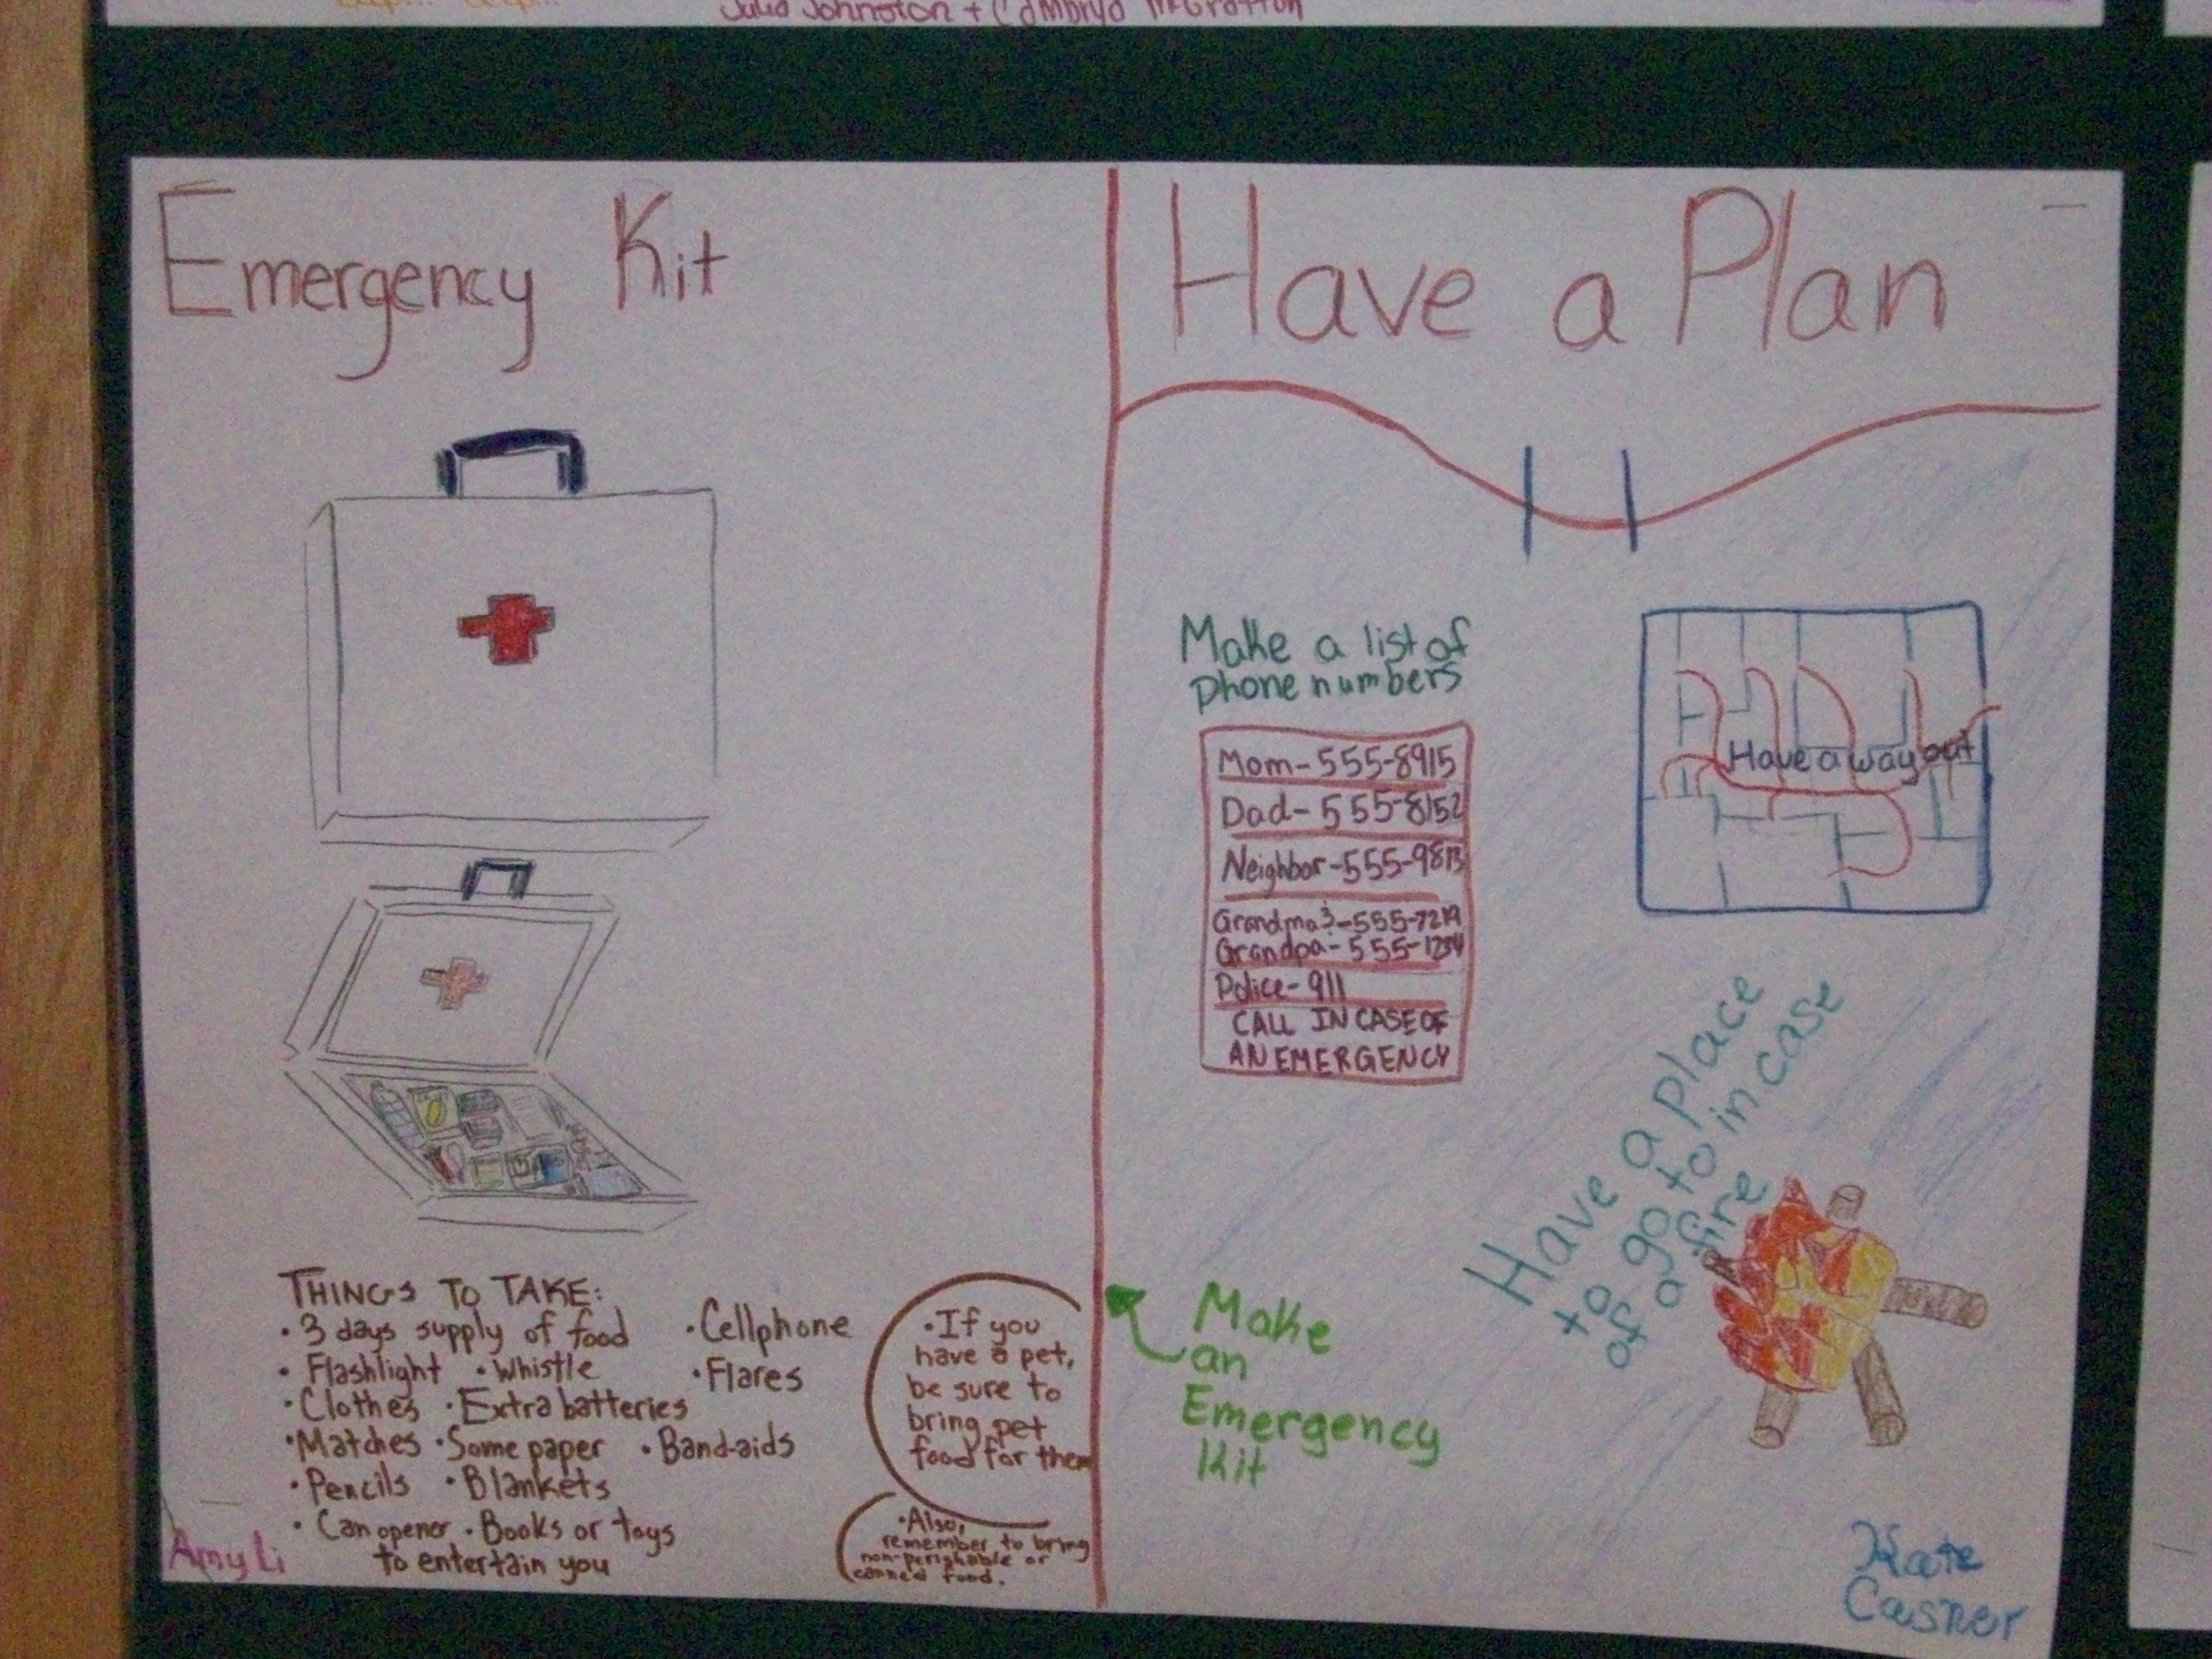 preparedness poster drawn by a student